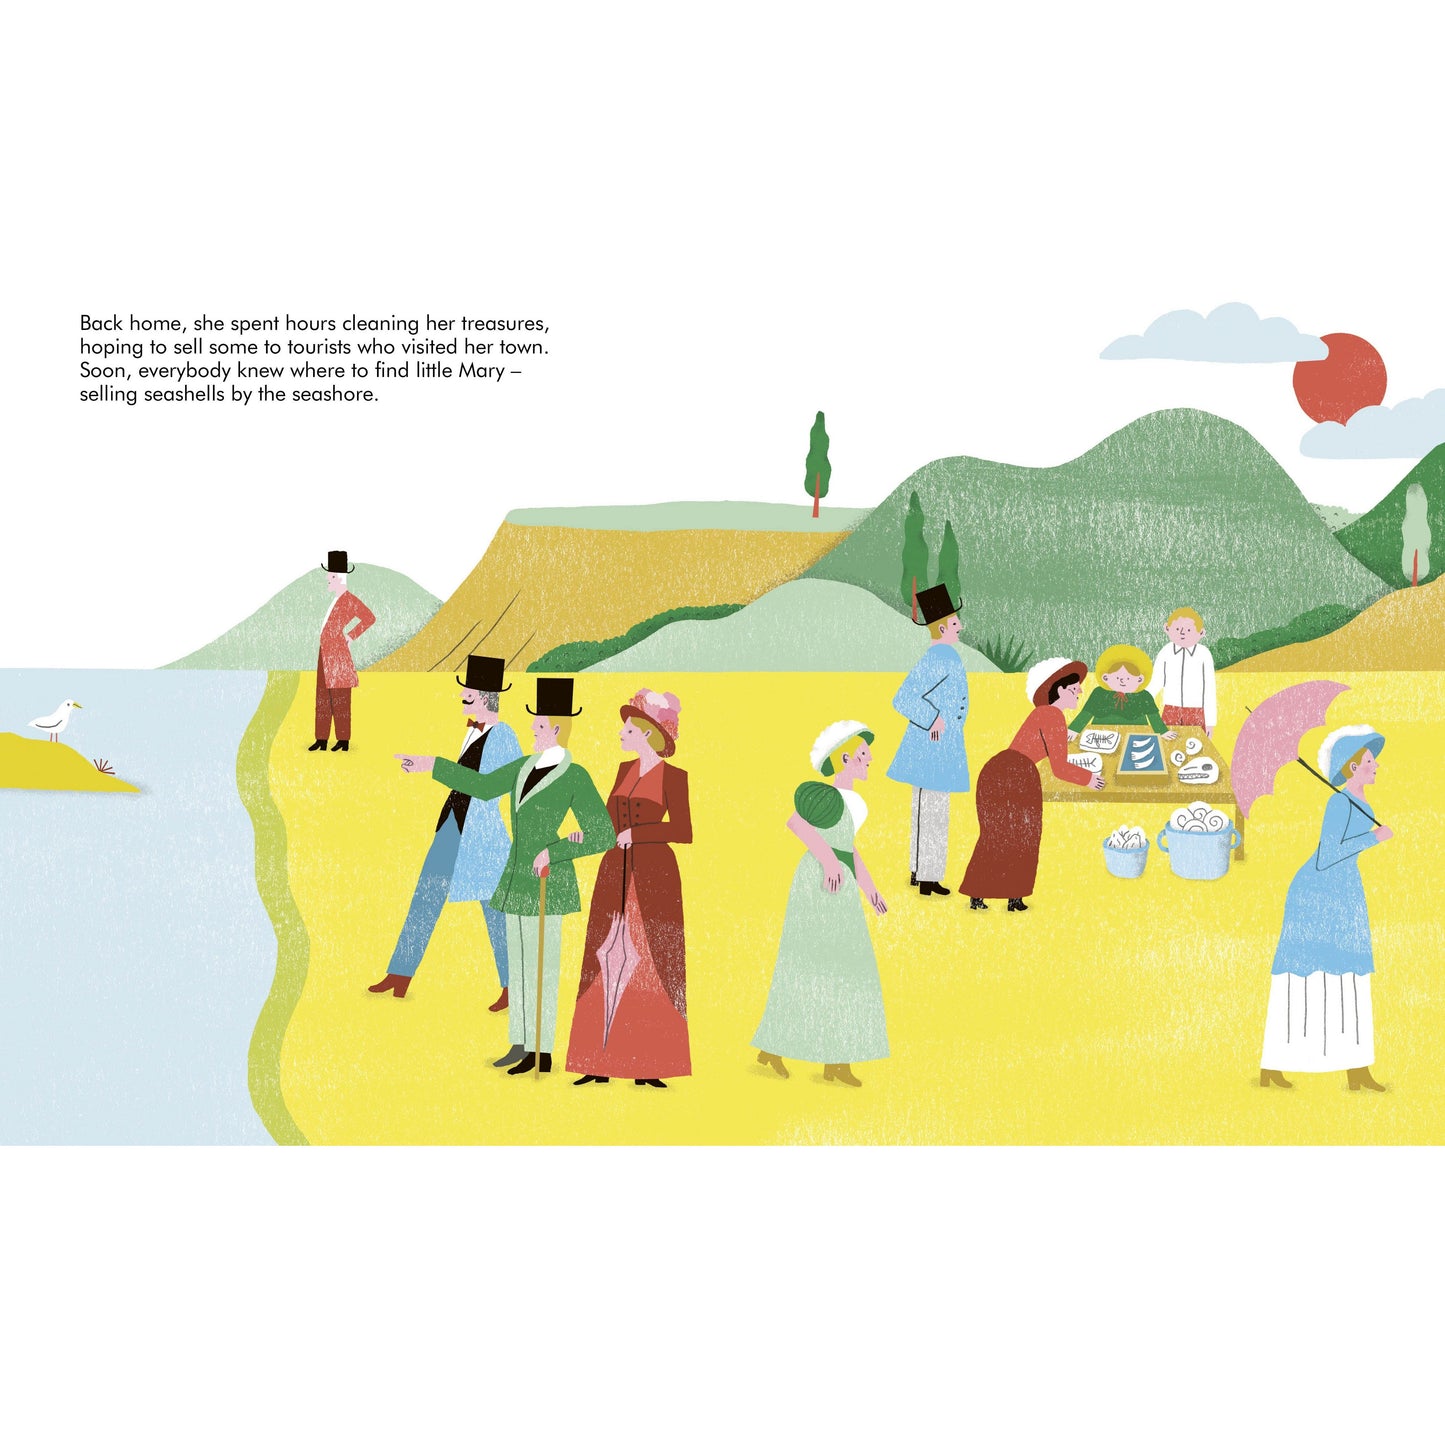 Little People Big Dreams: Mary Anning (HB)